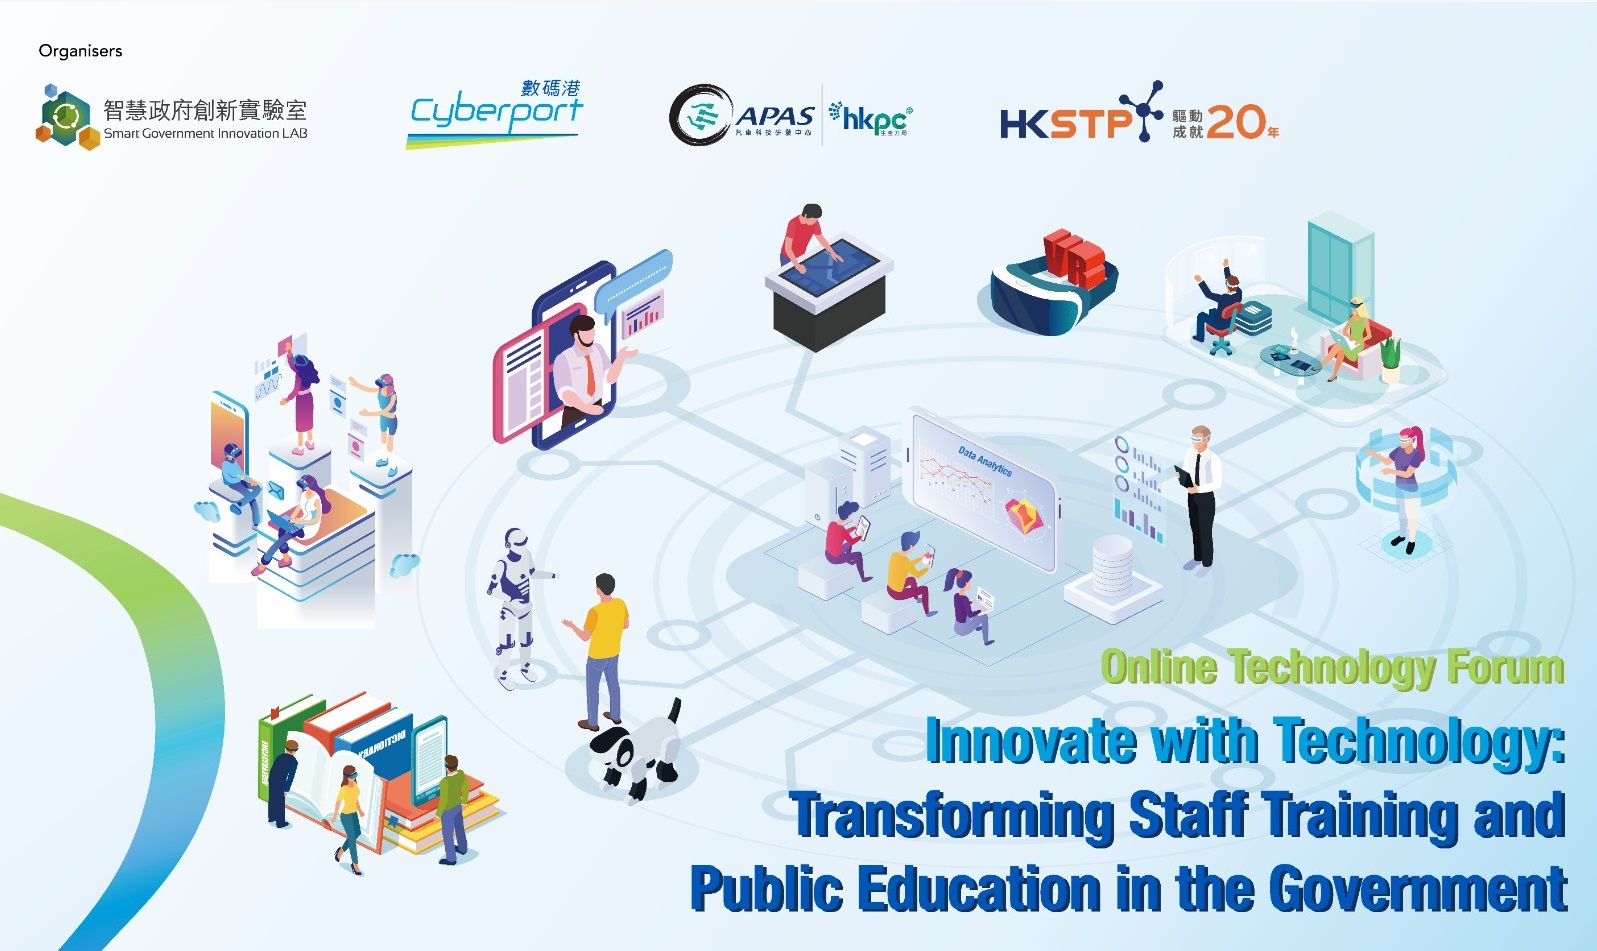 Technology Forum - Innovate with Technology: transforming staff training and public education in the Government